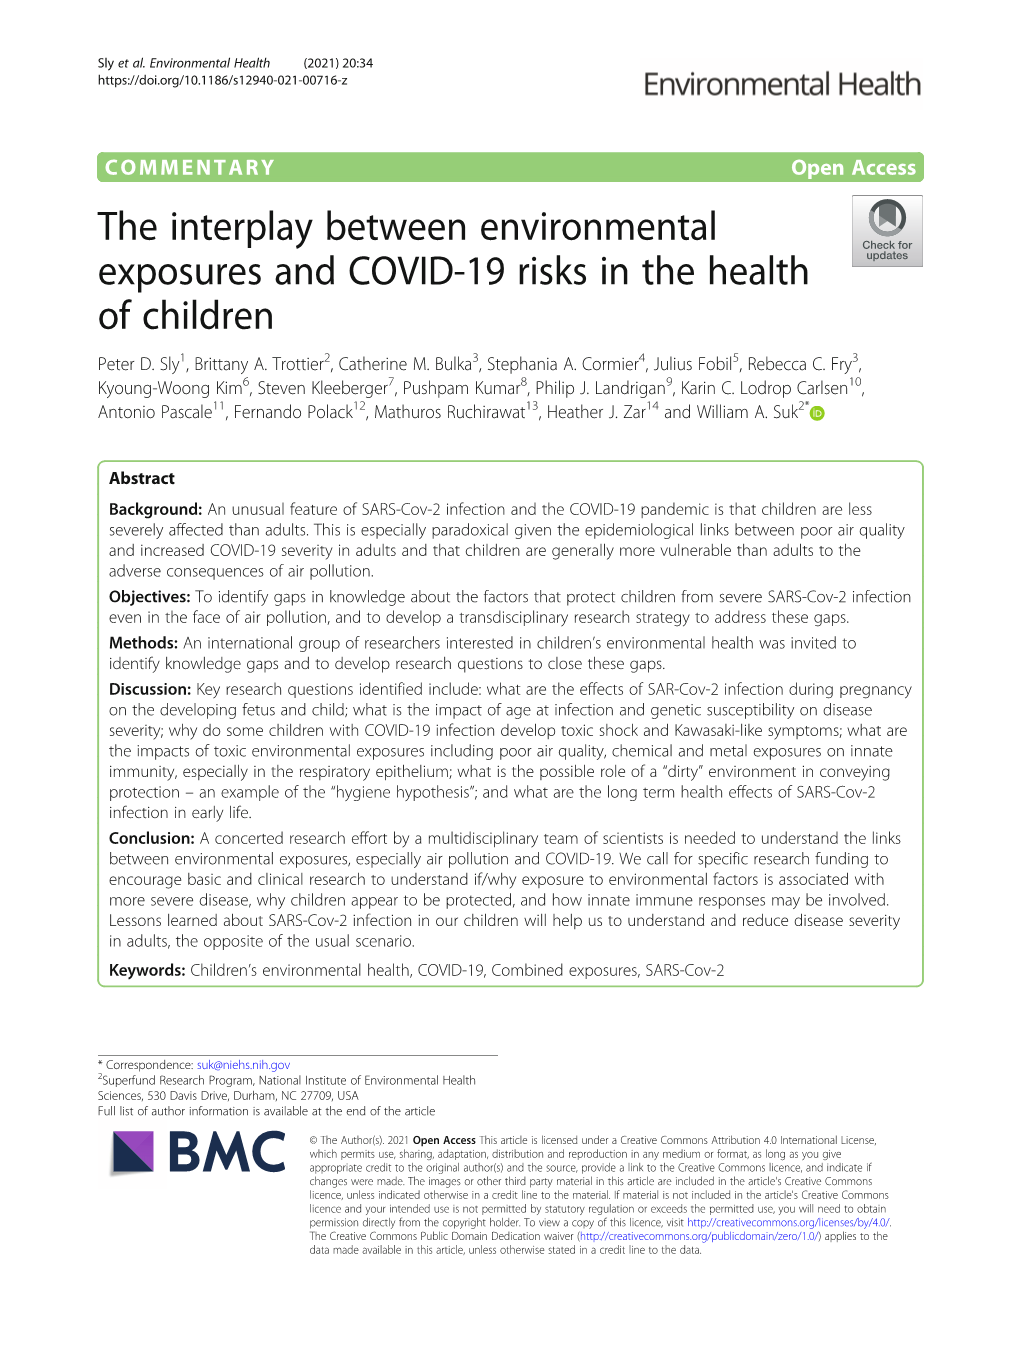 The Interplay Between Environmental Exposures and COVID-19 Risks in the Health of Children Peter D